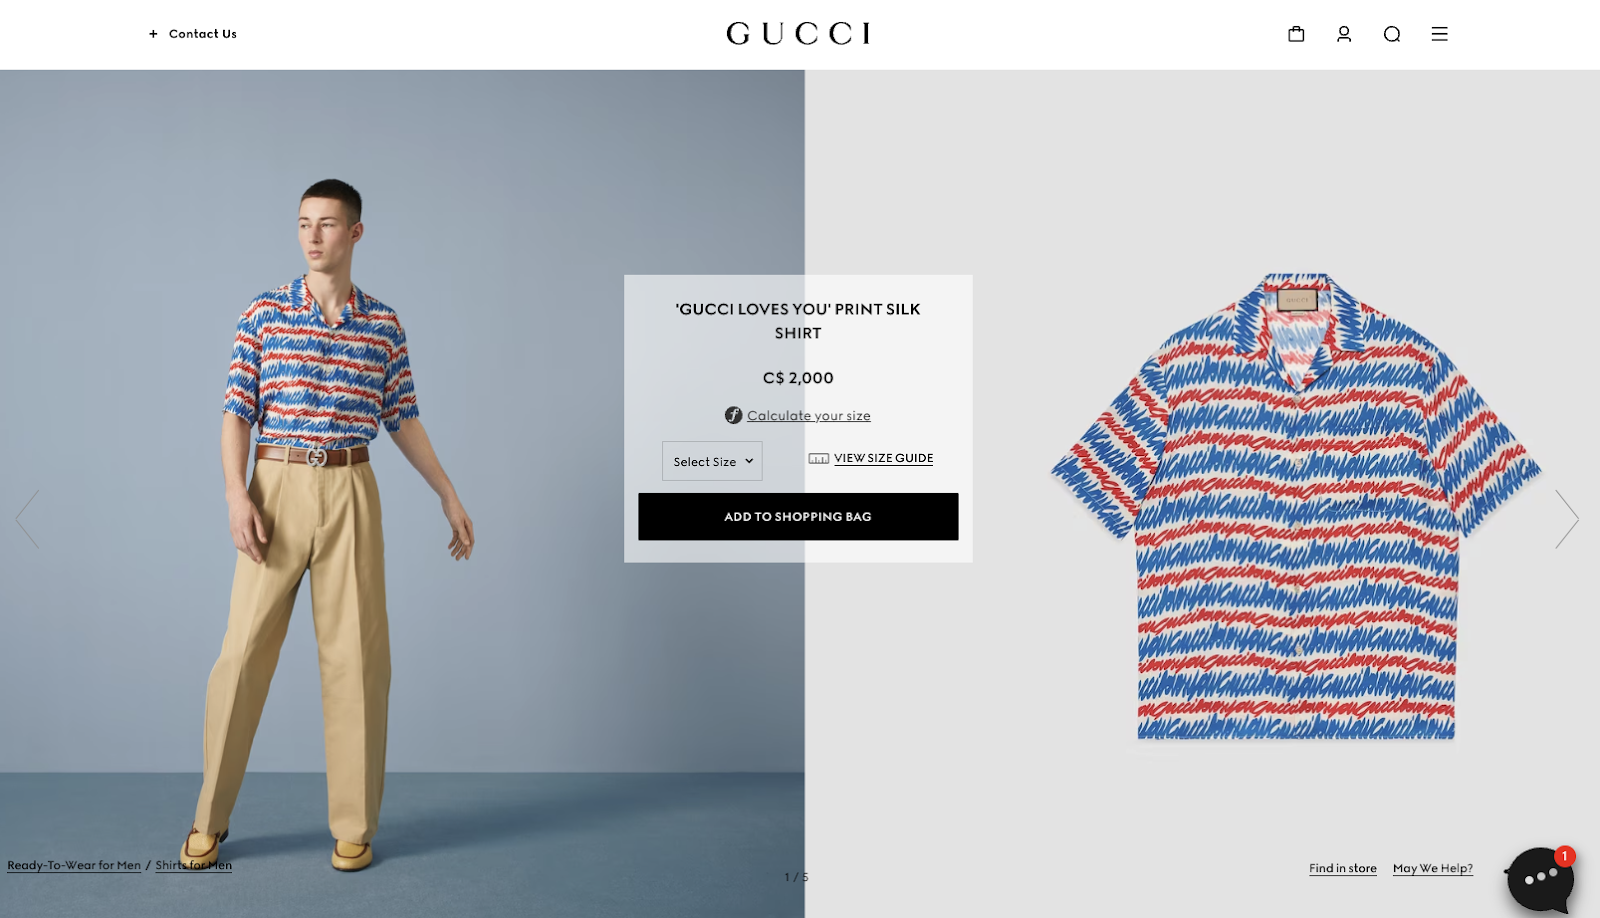 Gucci men’s silk shirt for sale on its website for $2,000.